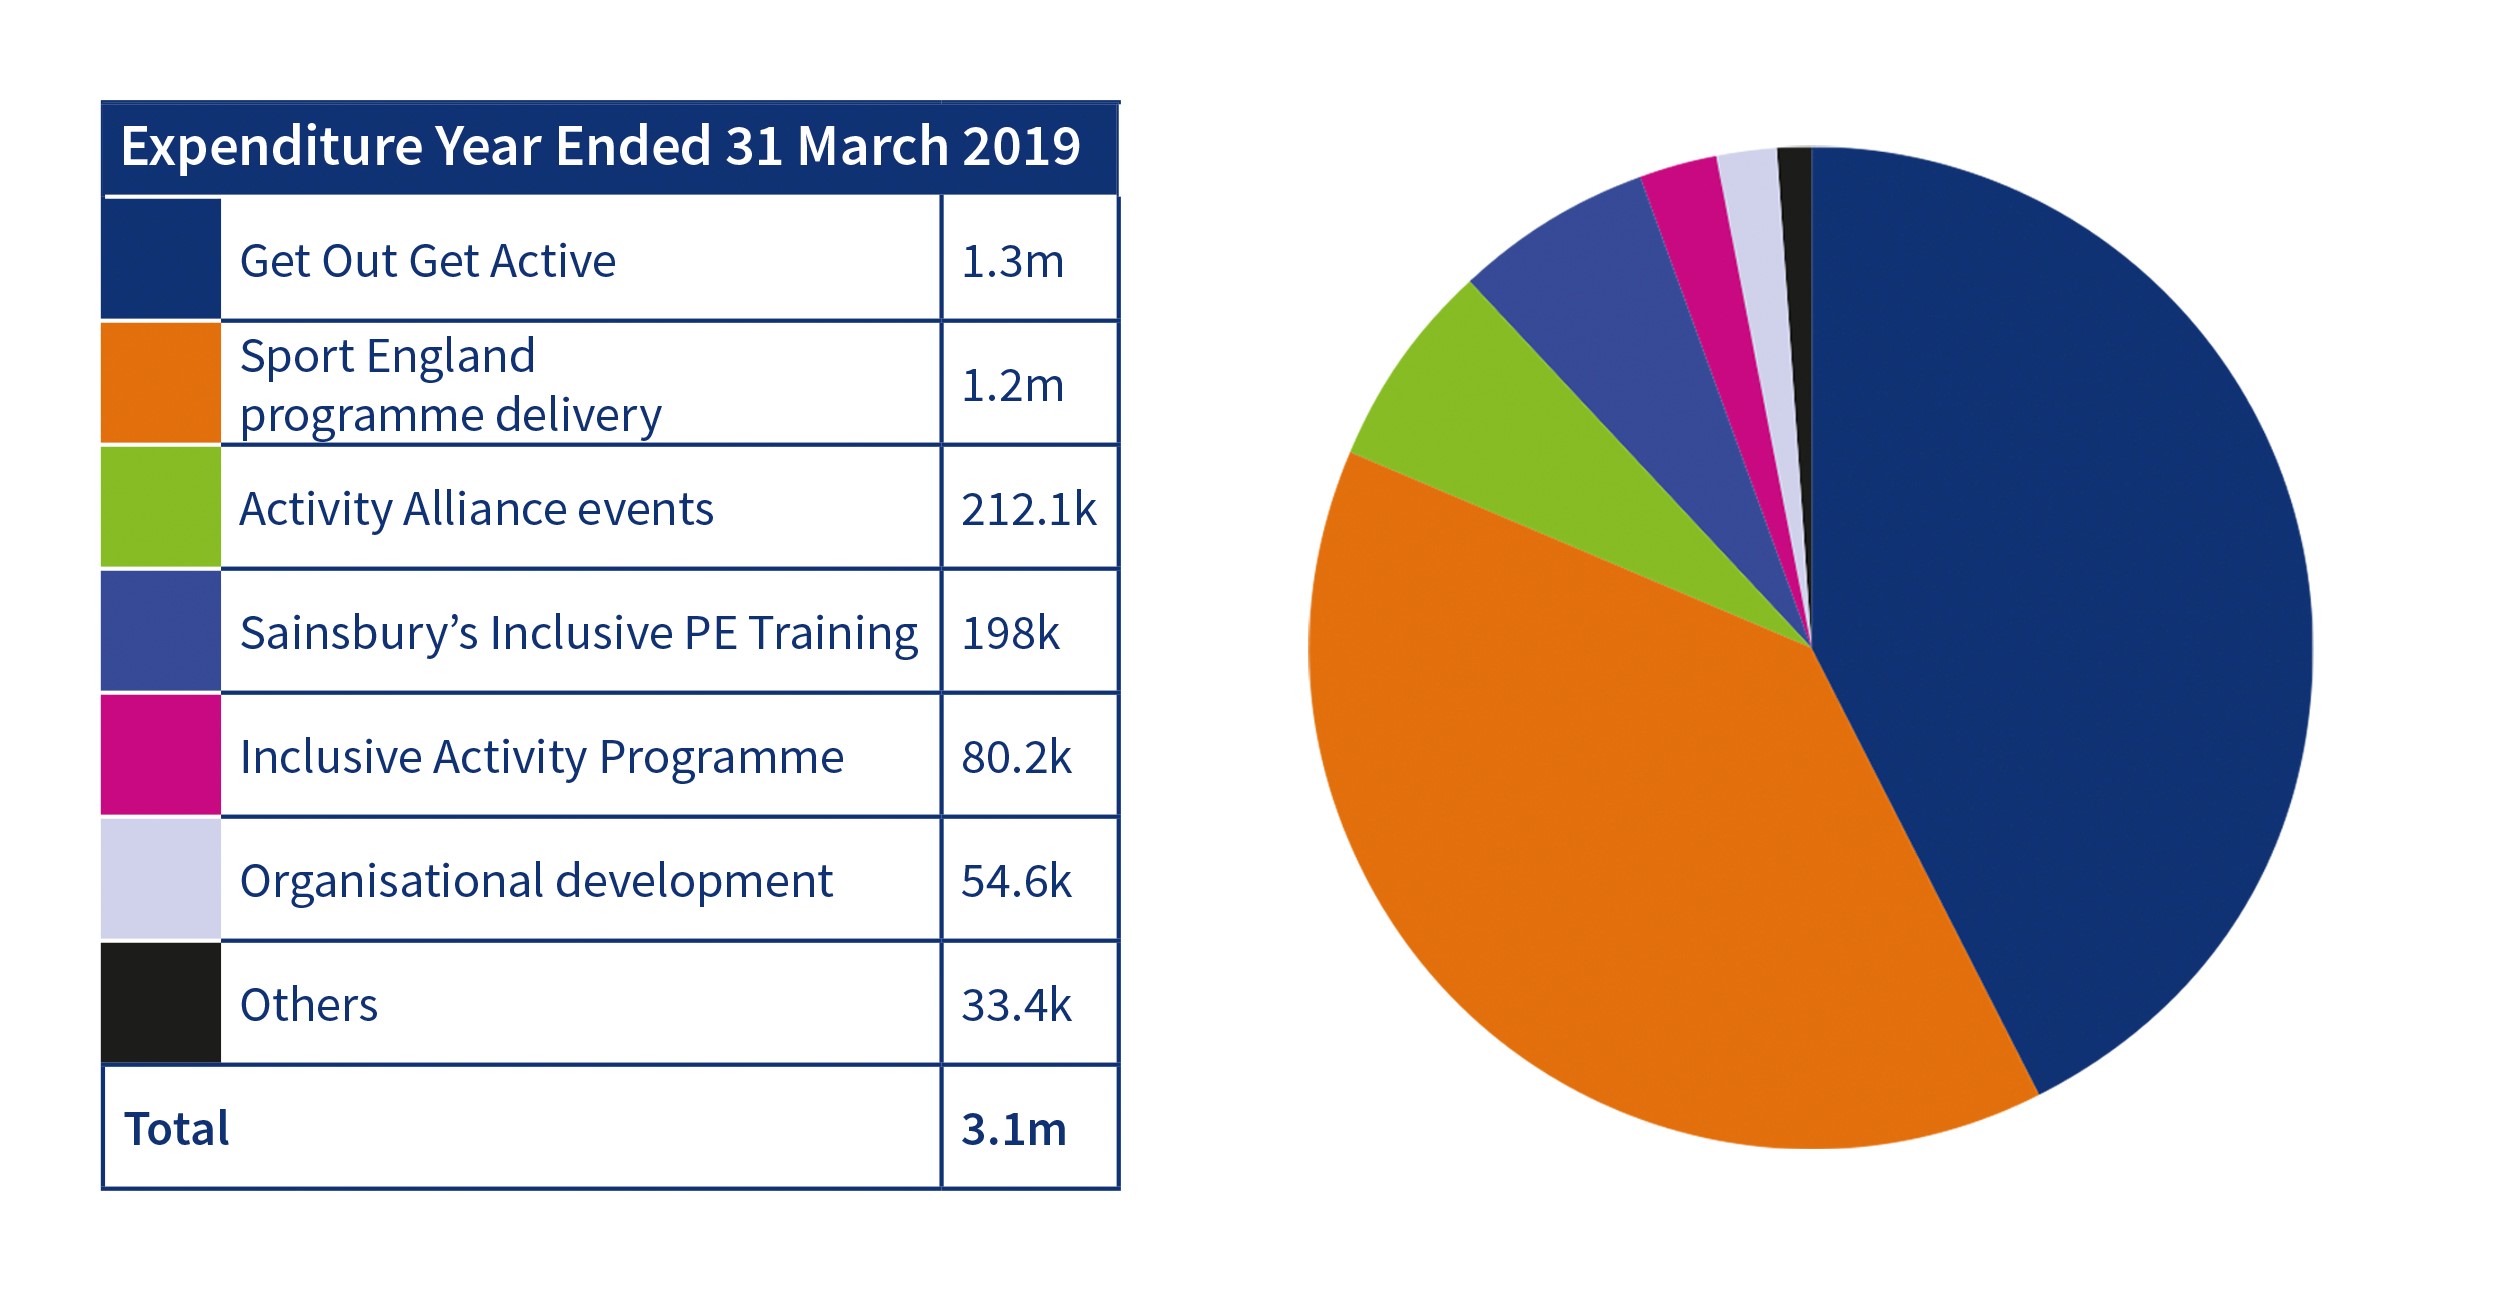 Activity Alliance expenditure year ended 31 March 2019 table and pie chart